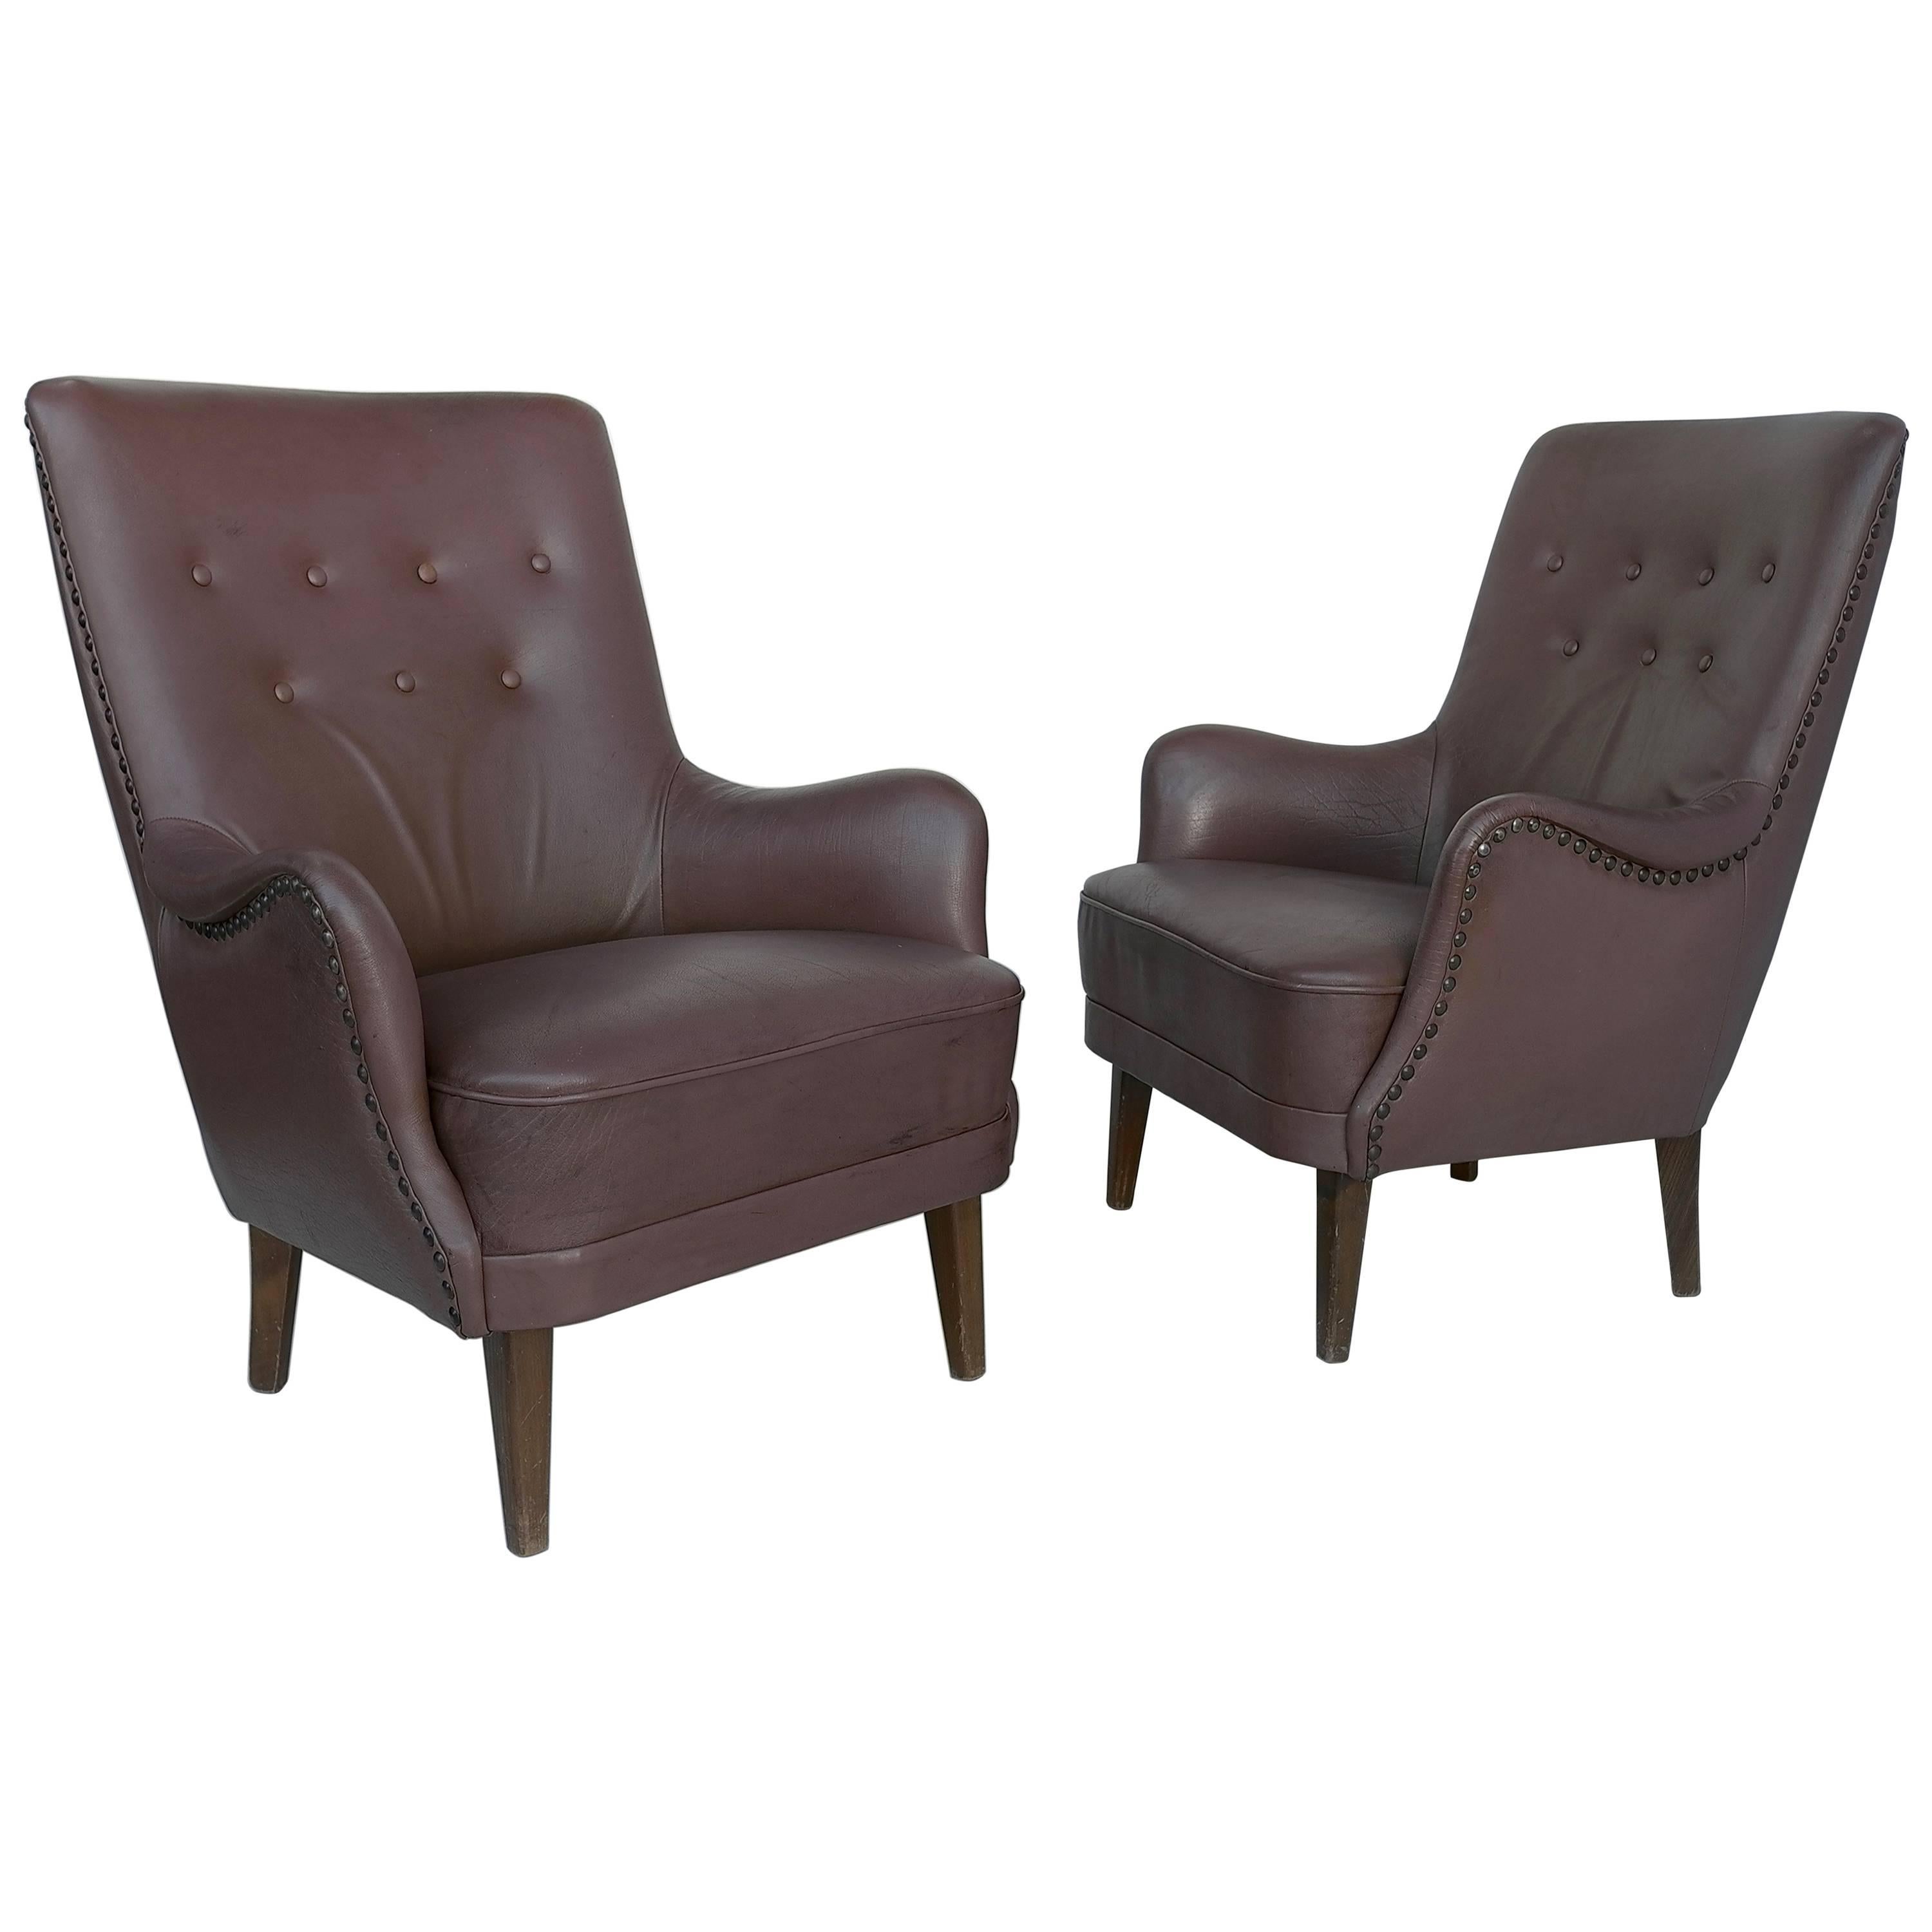 Pair of Danish High Back Armchairs in Brown Leather in style of Arne Vodder